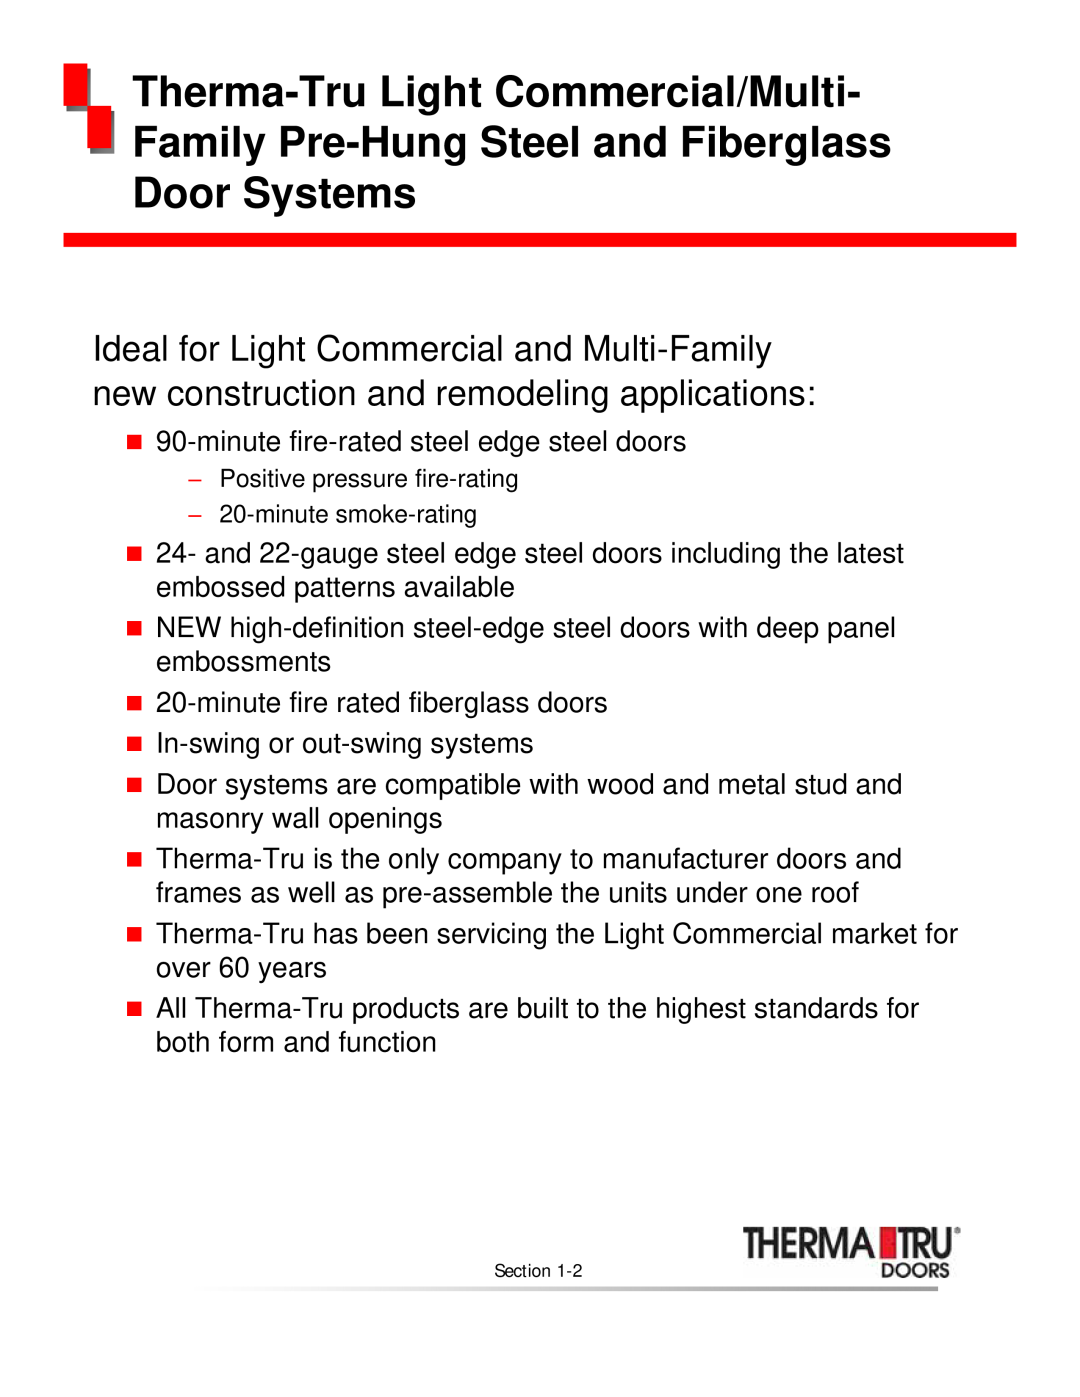 Therma-Tru none manual Therma-TruLight Commercial/Multi, Family Pre-HungSteel and Fiberglass Door Systems 